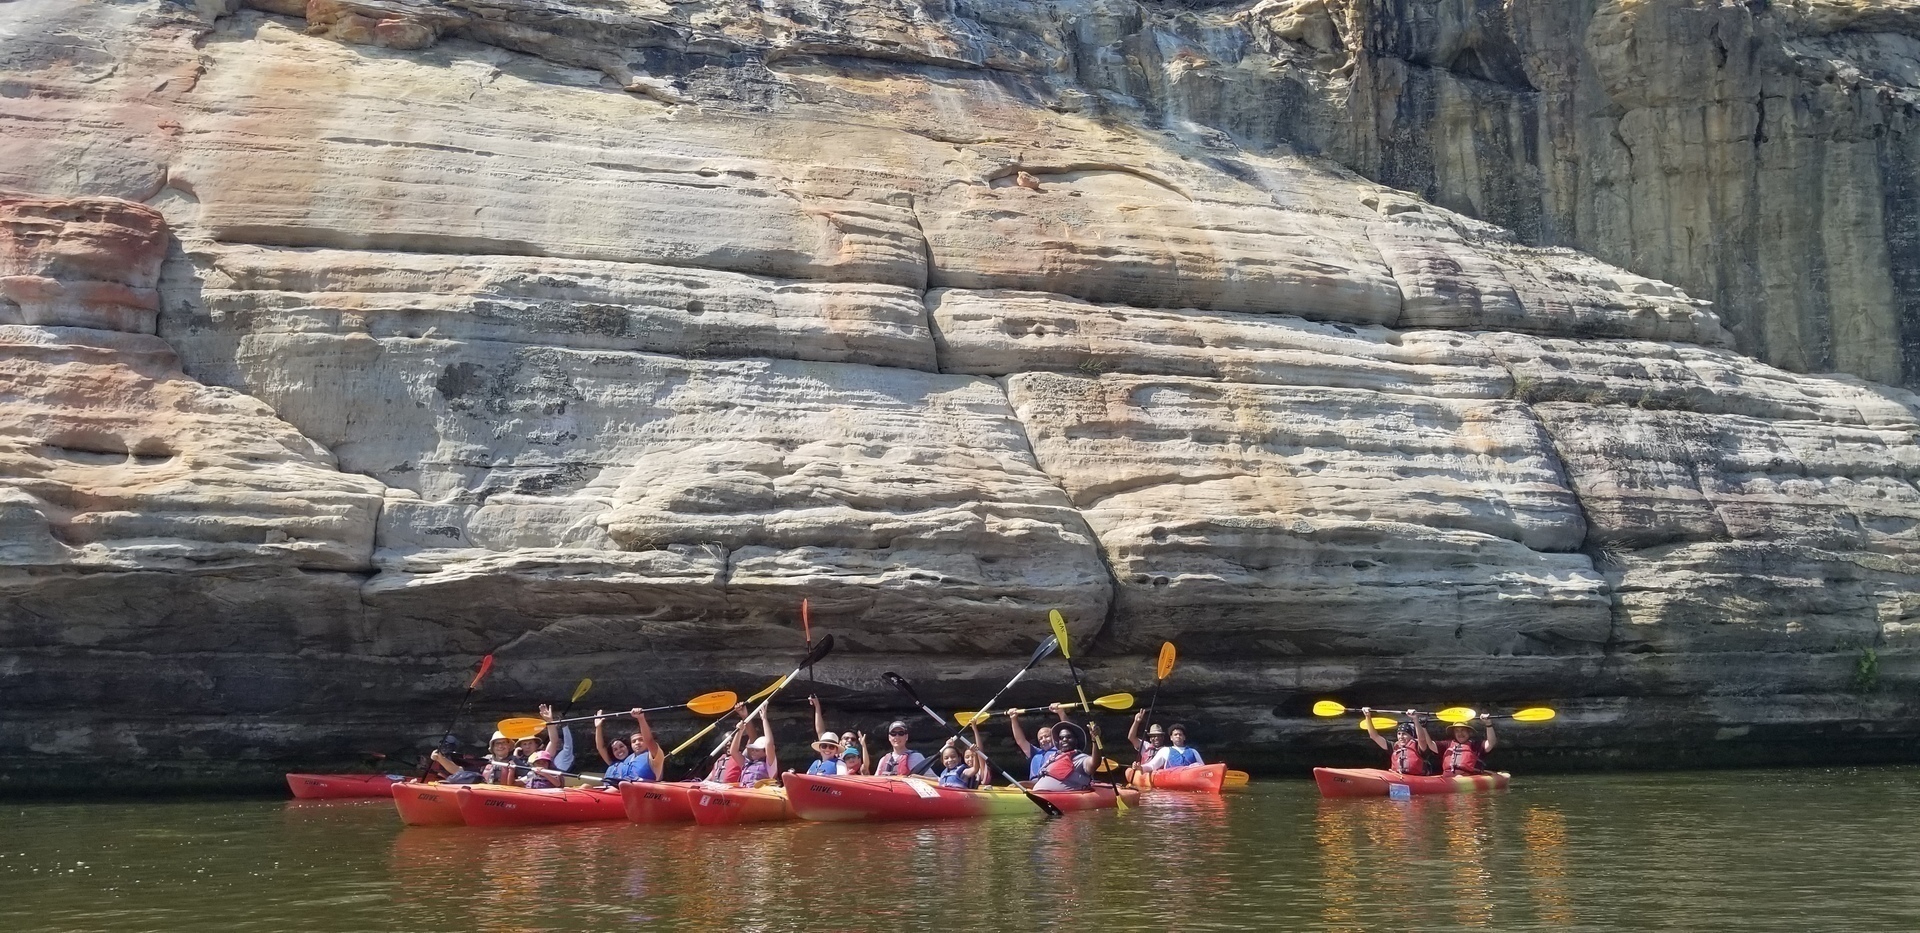 Starved Rock Guided Kayak Tour - July 29, Hinsdale, Illinois, United States